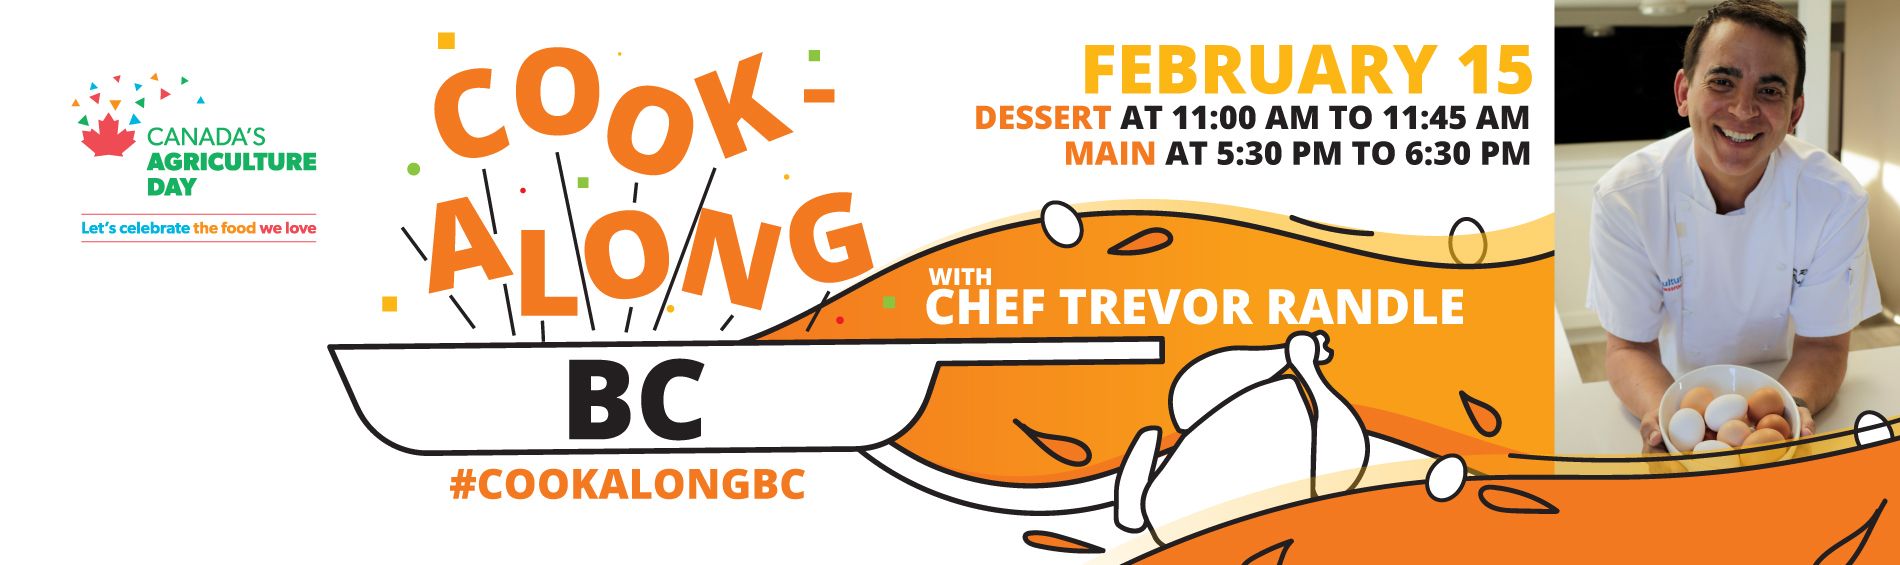 Cook-Along BC Event - February 15